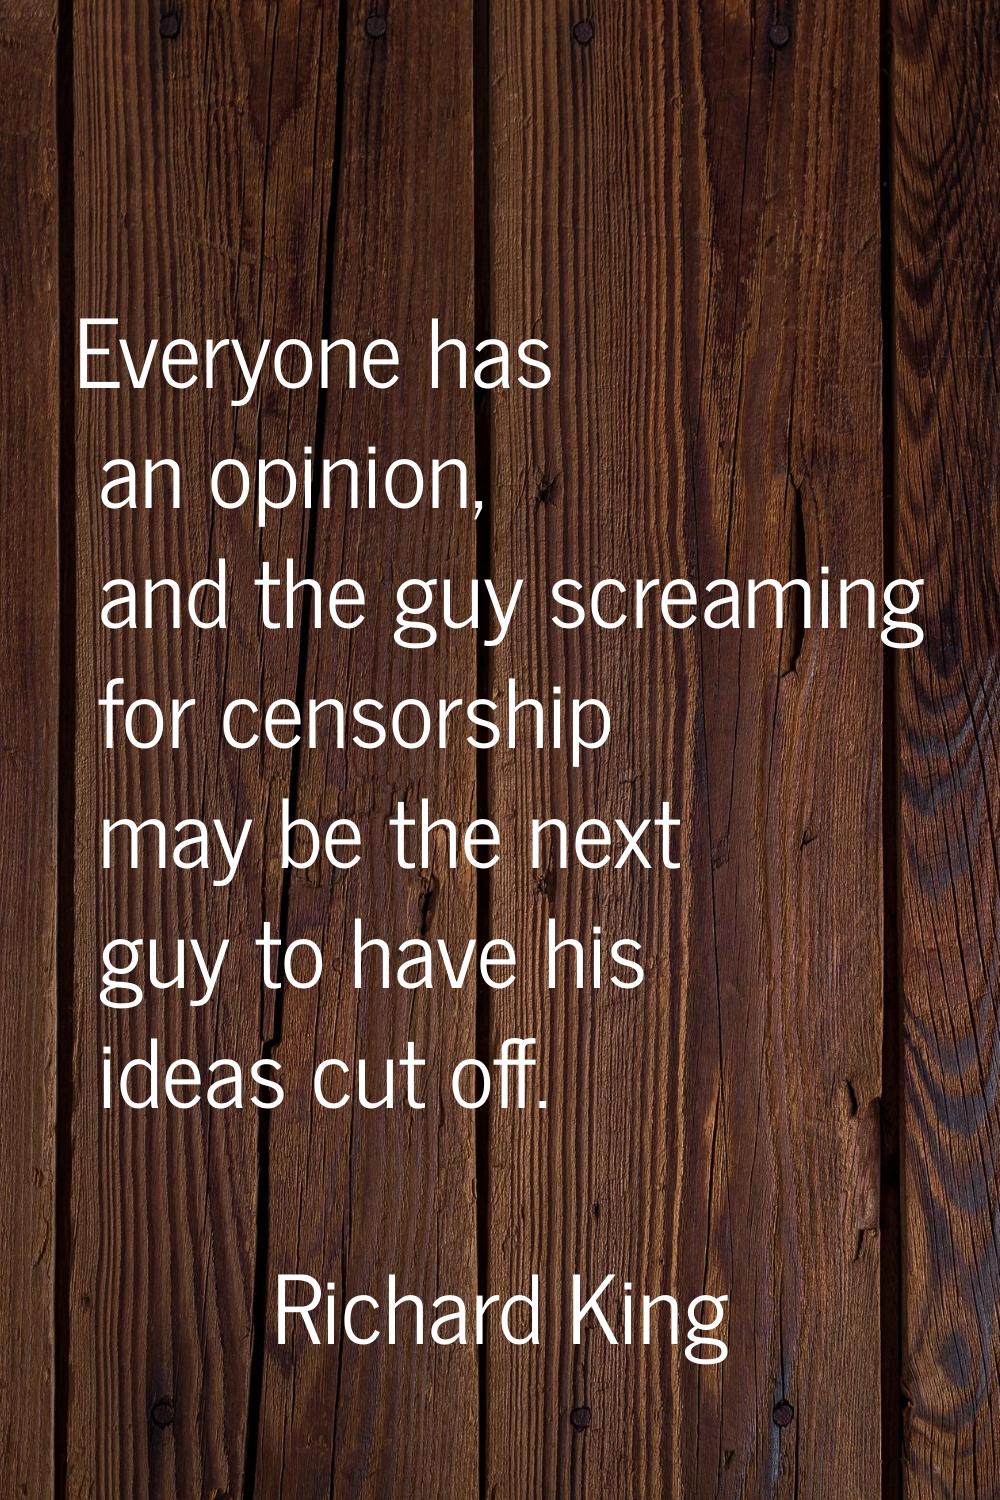 Everyone has an opinion, and the guy screaming for censorship may be the next guy to have his ideas